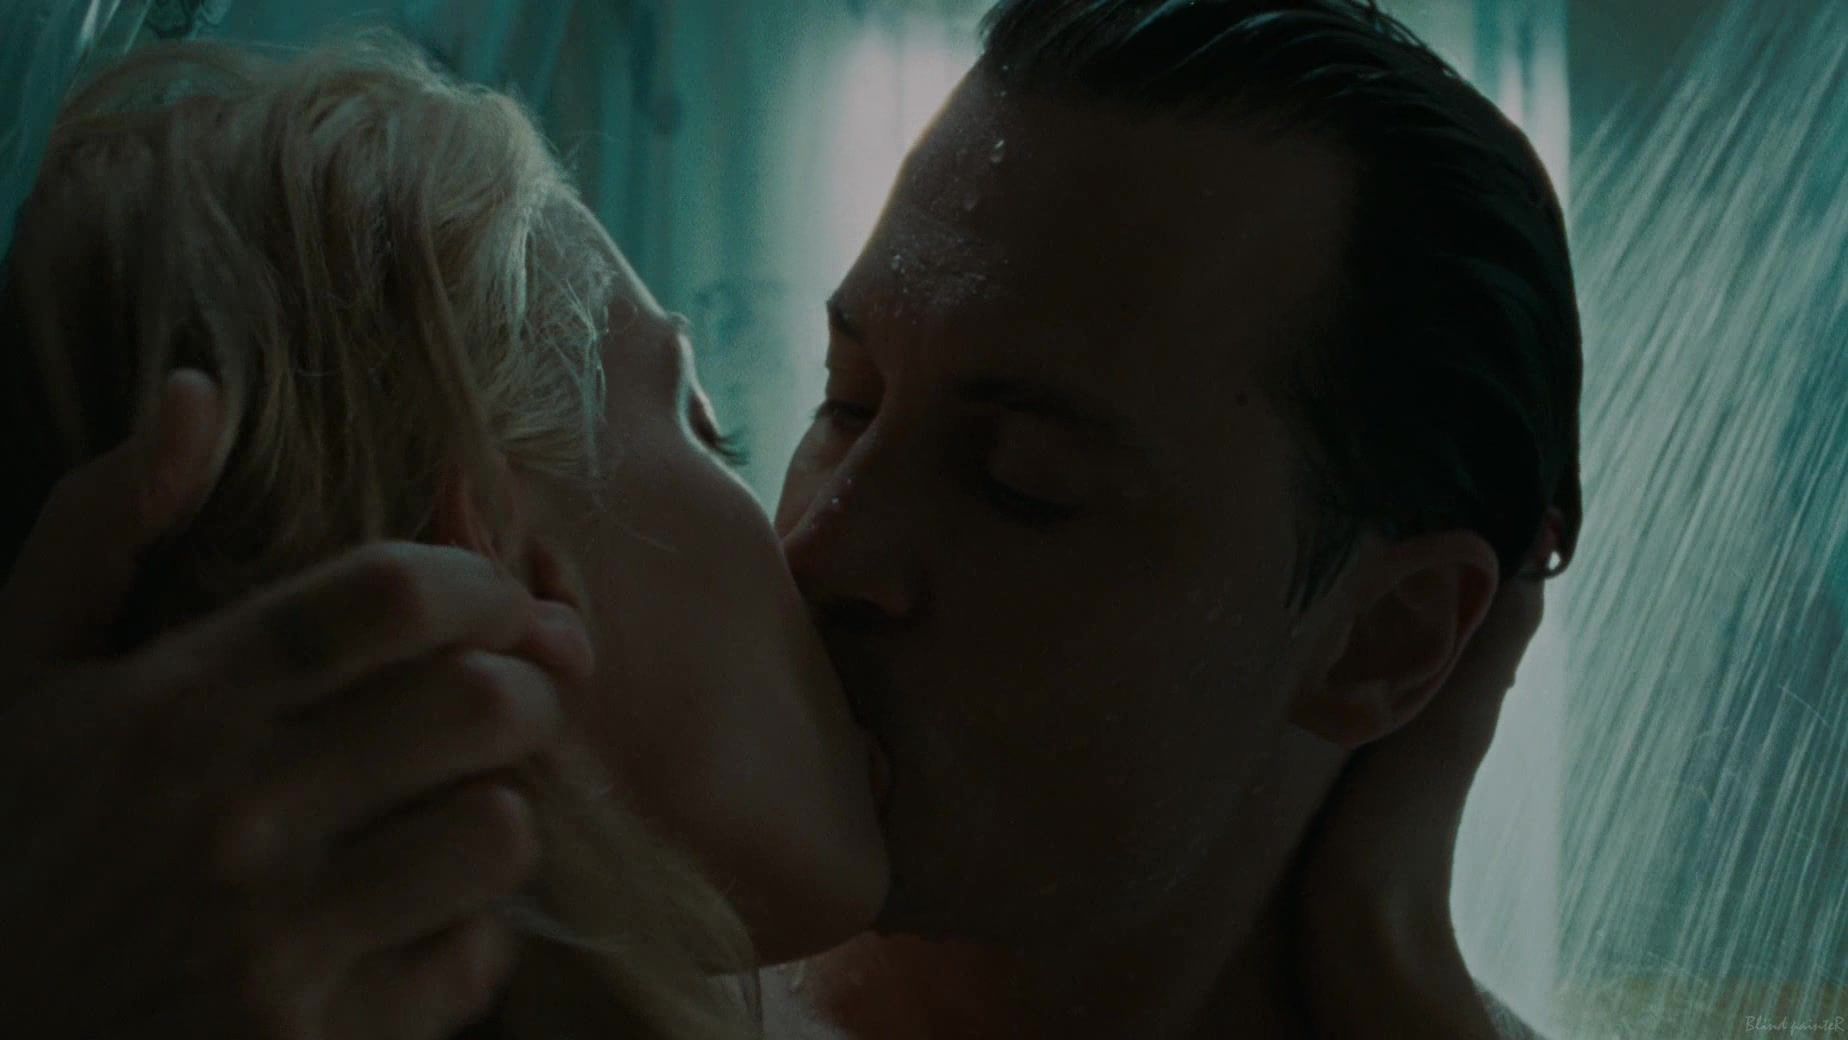 Real Amateurs Amber Heard nude - The Rum Diary (2011) Beauty - 1